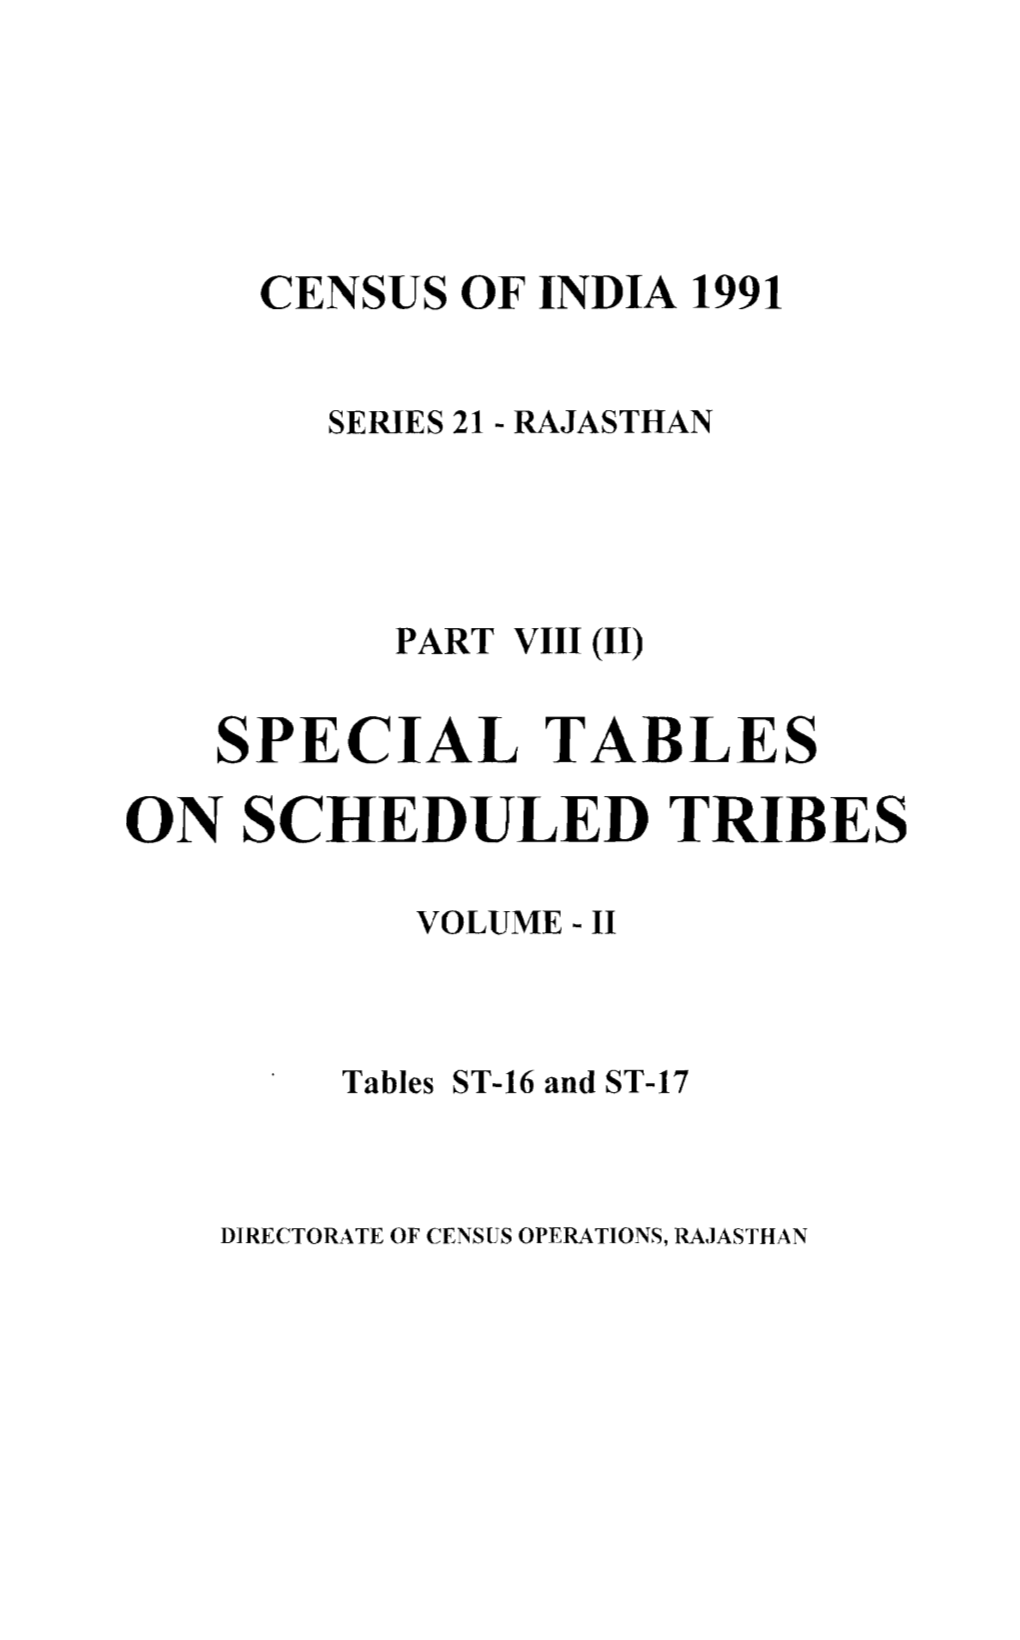 Special Tables on Schedueld Tribes, Part VIII